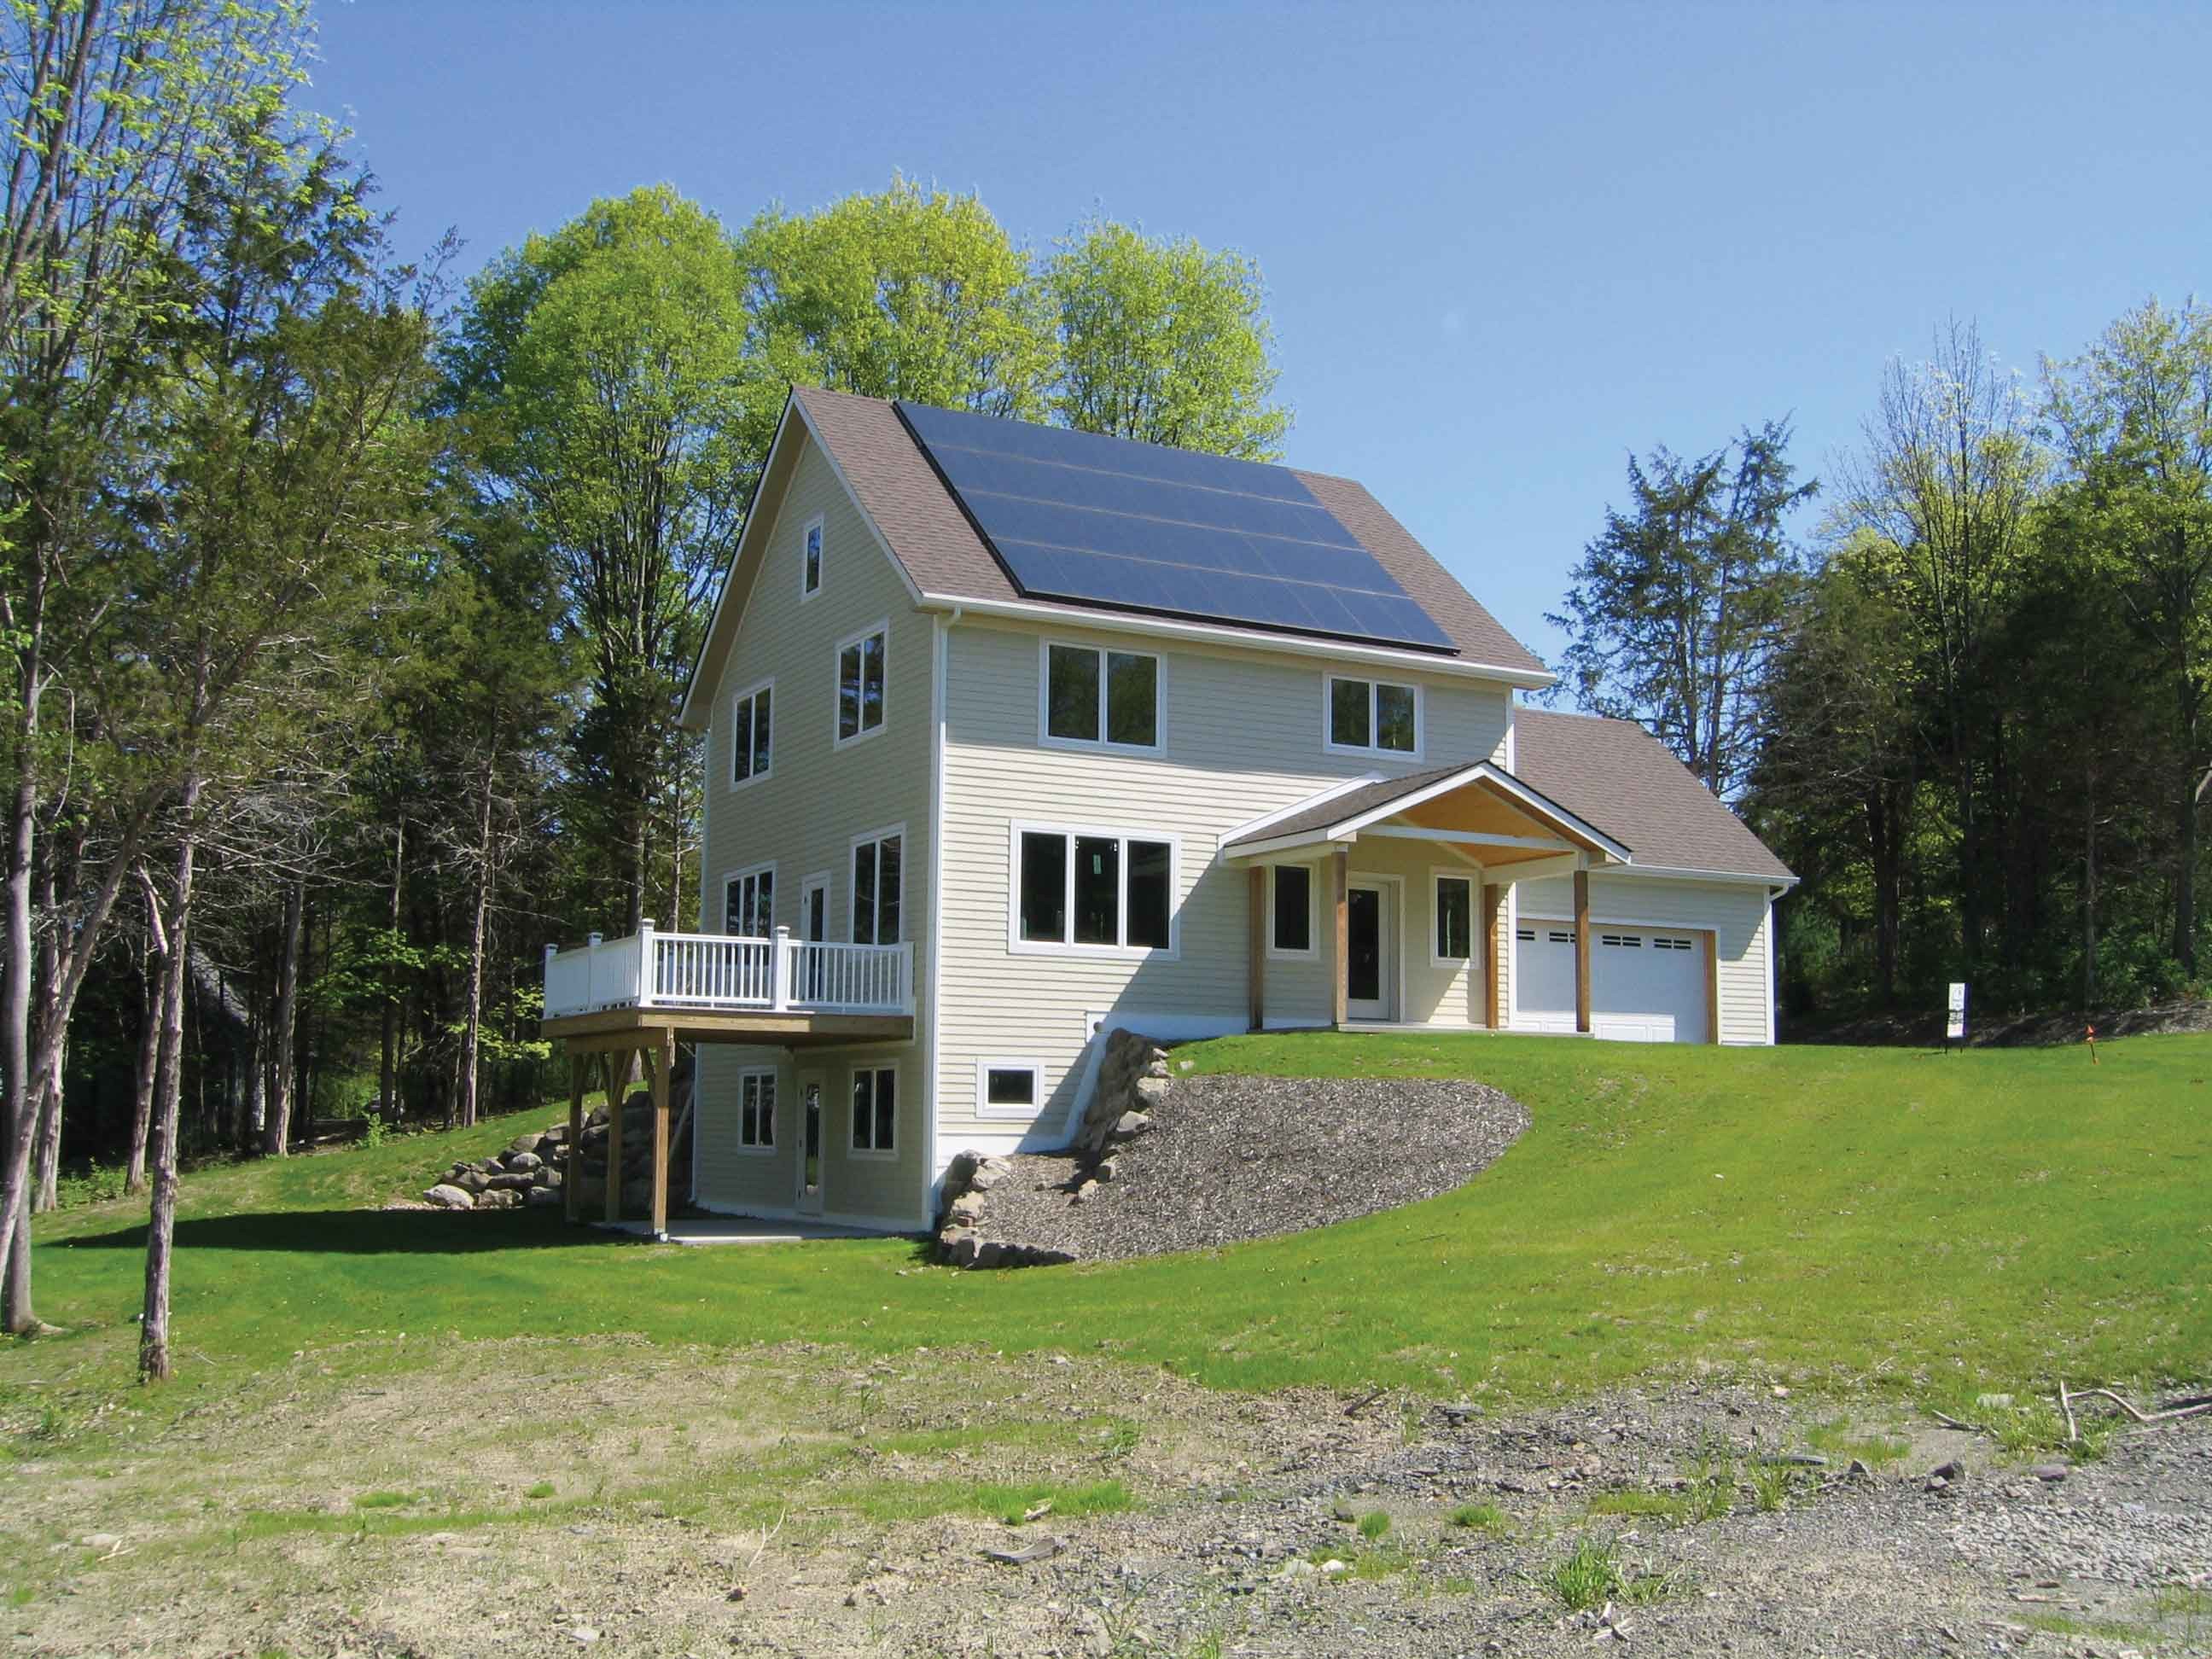 The Question: Is a Net-Zero Energy Home a Reality?